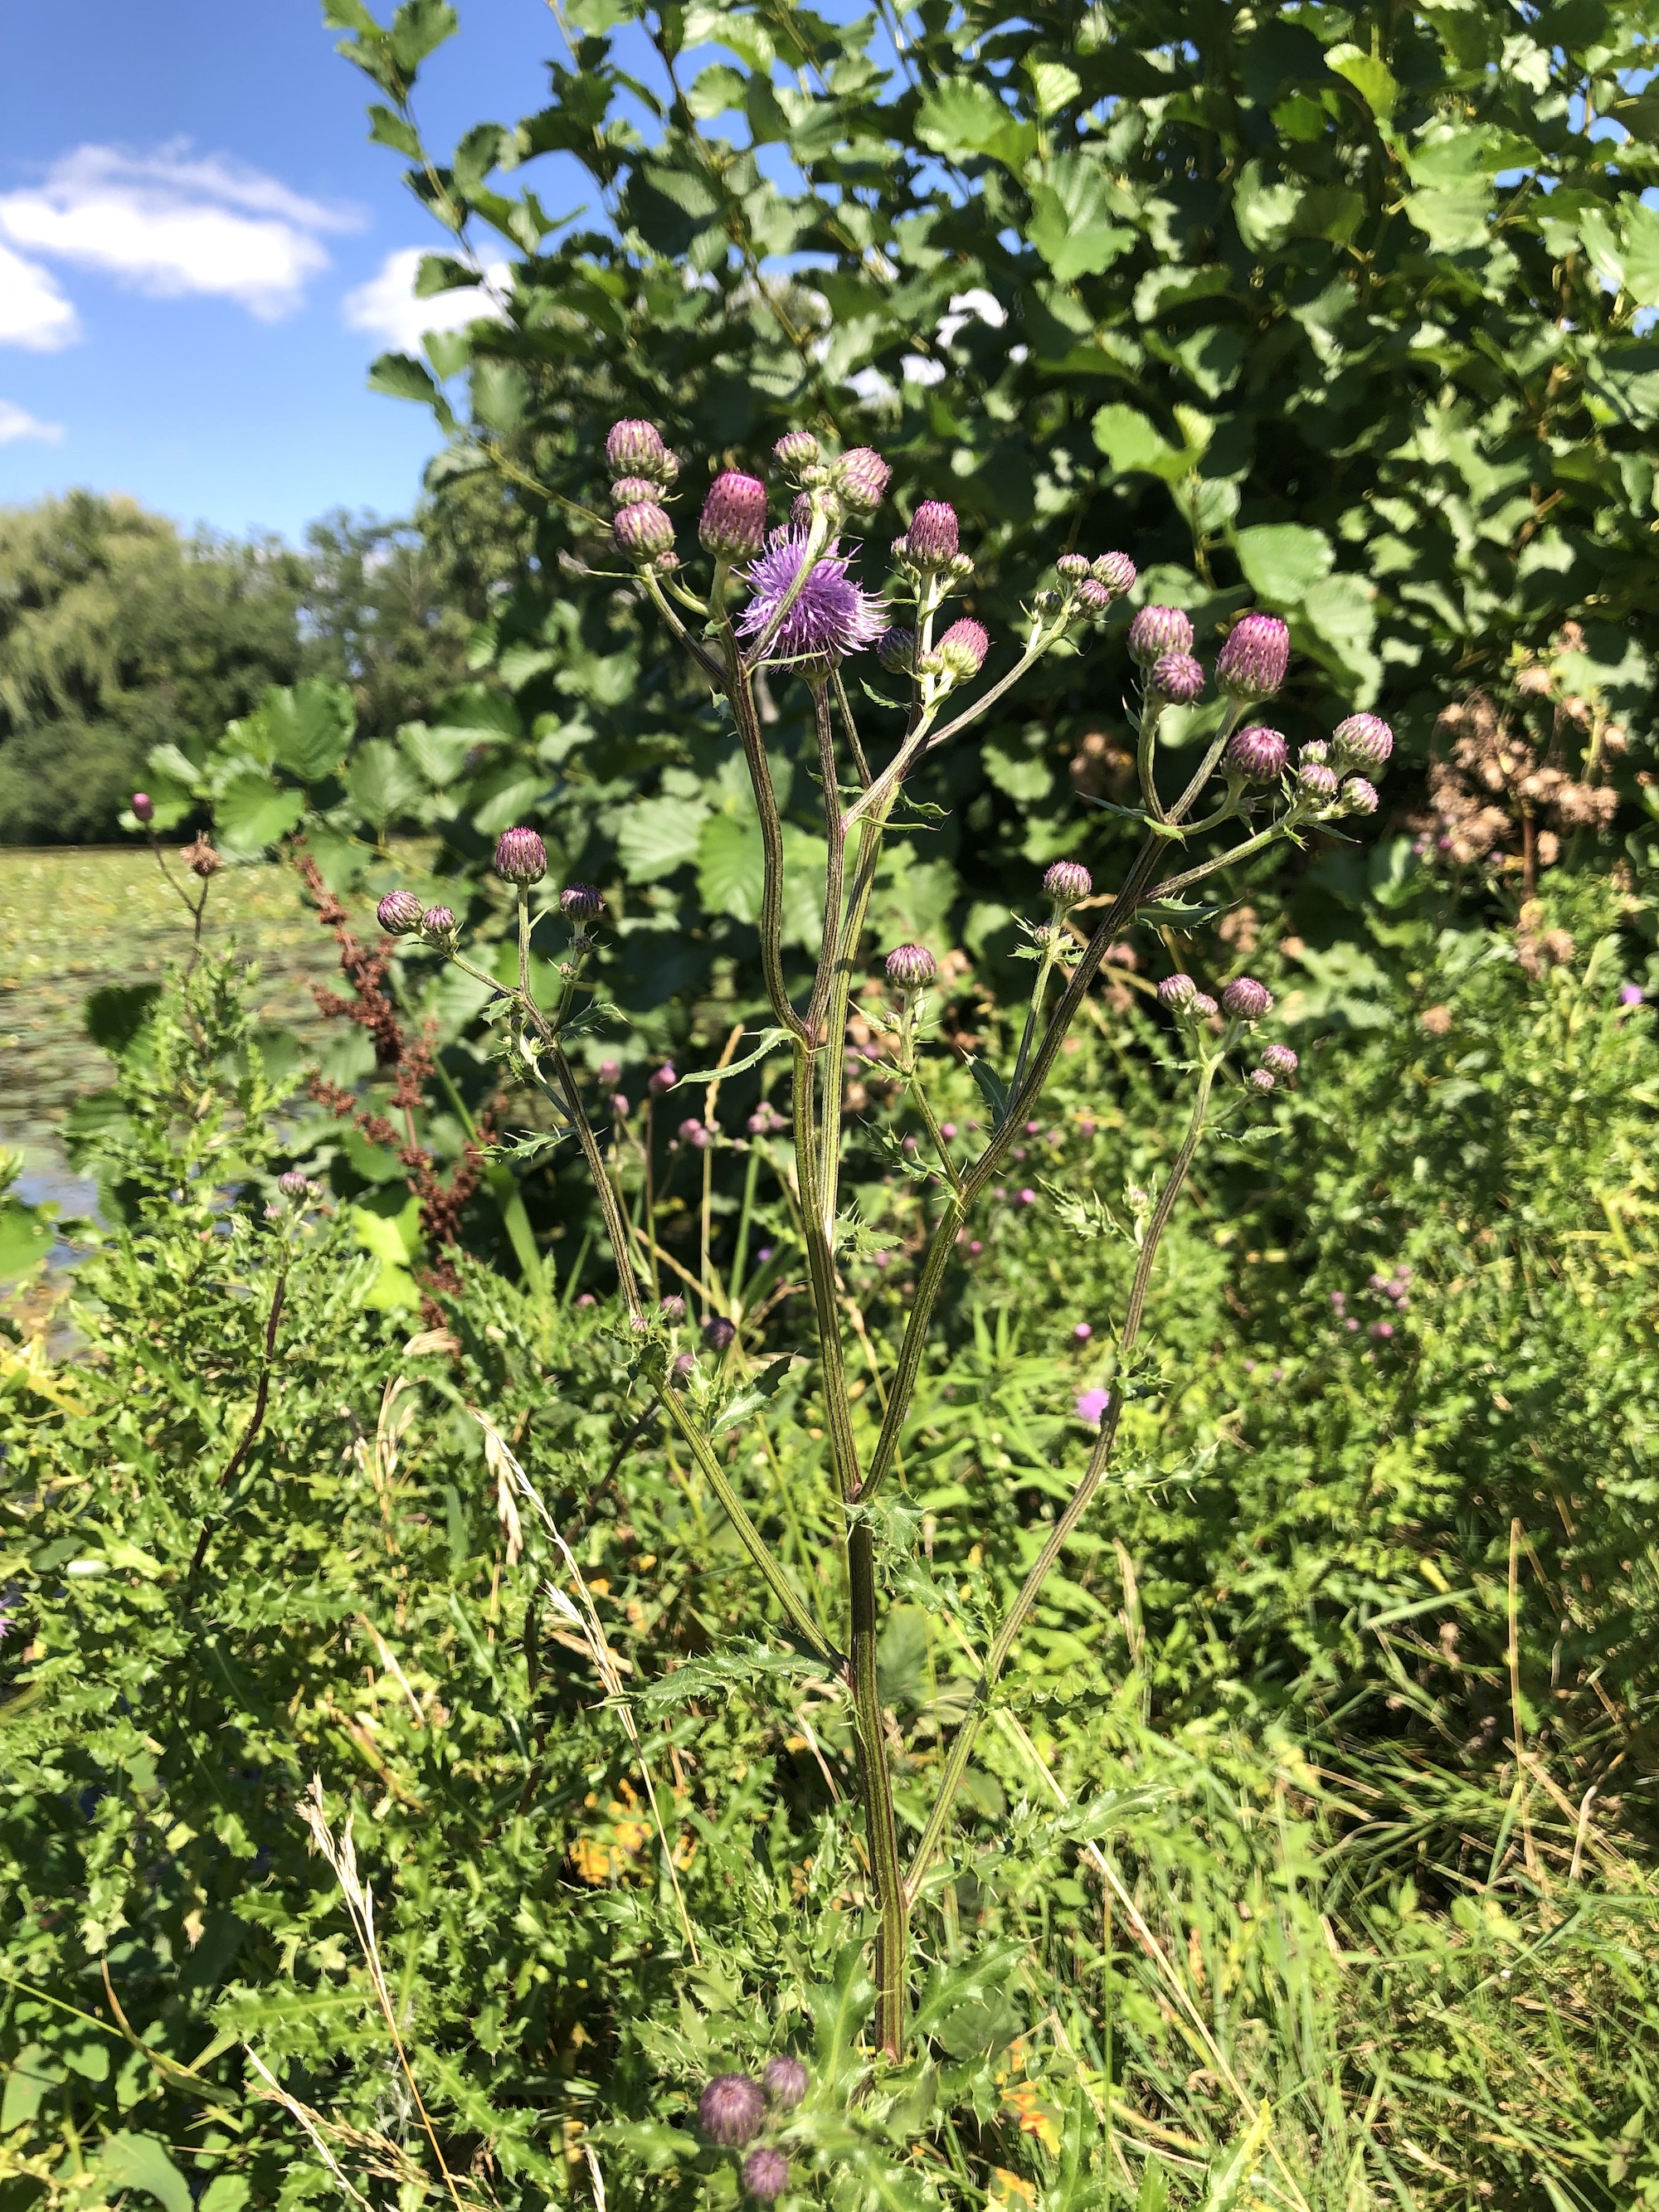 Canada Thistle on the shore of Vilas Park Lagoon in Vilas Park in Madison, Wisconsin on August 22, 2022.